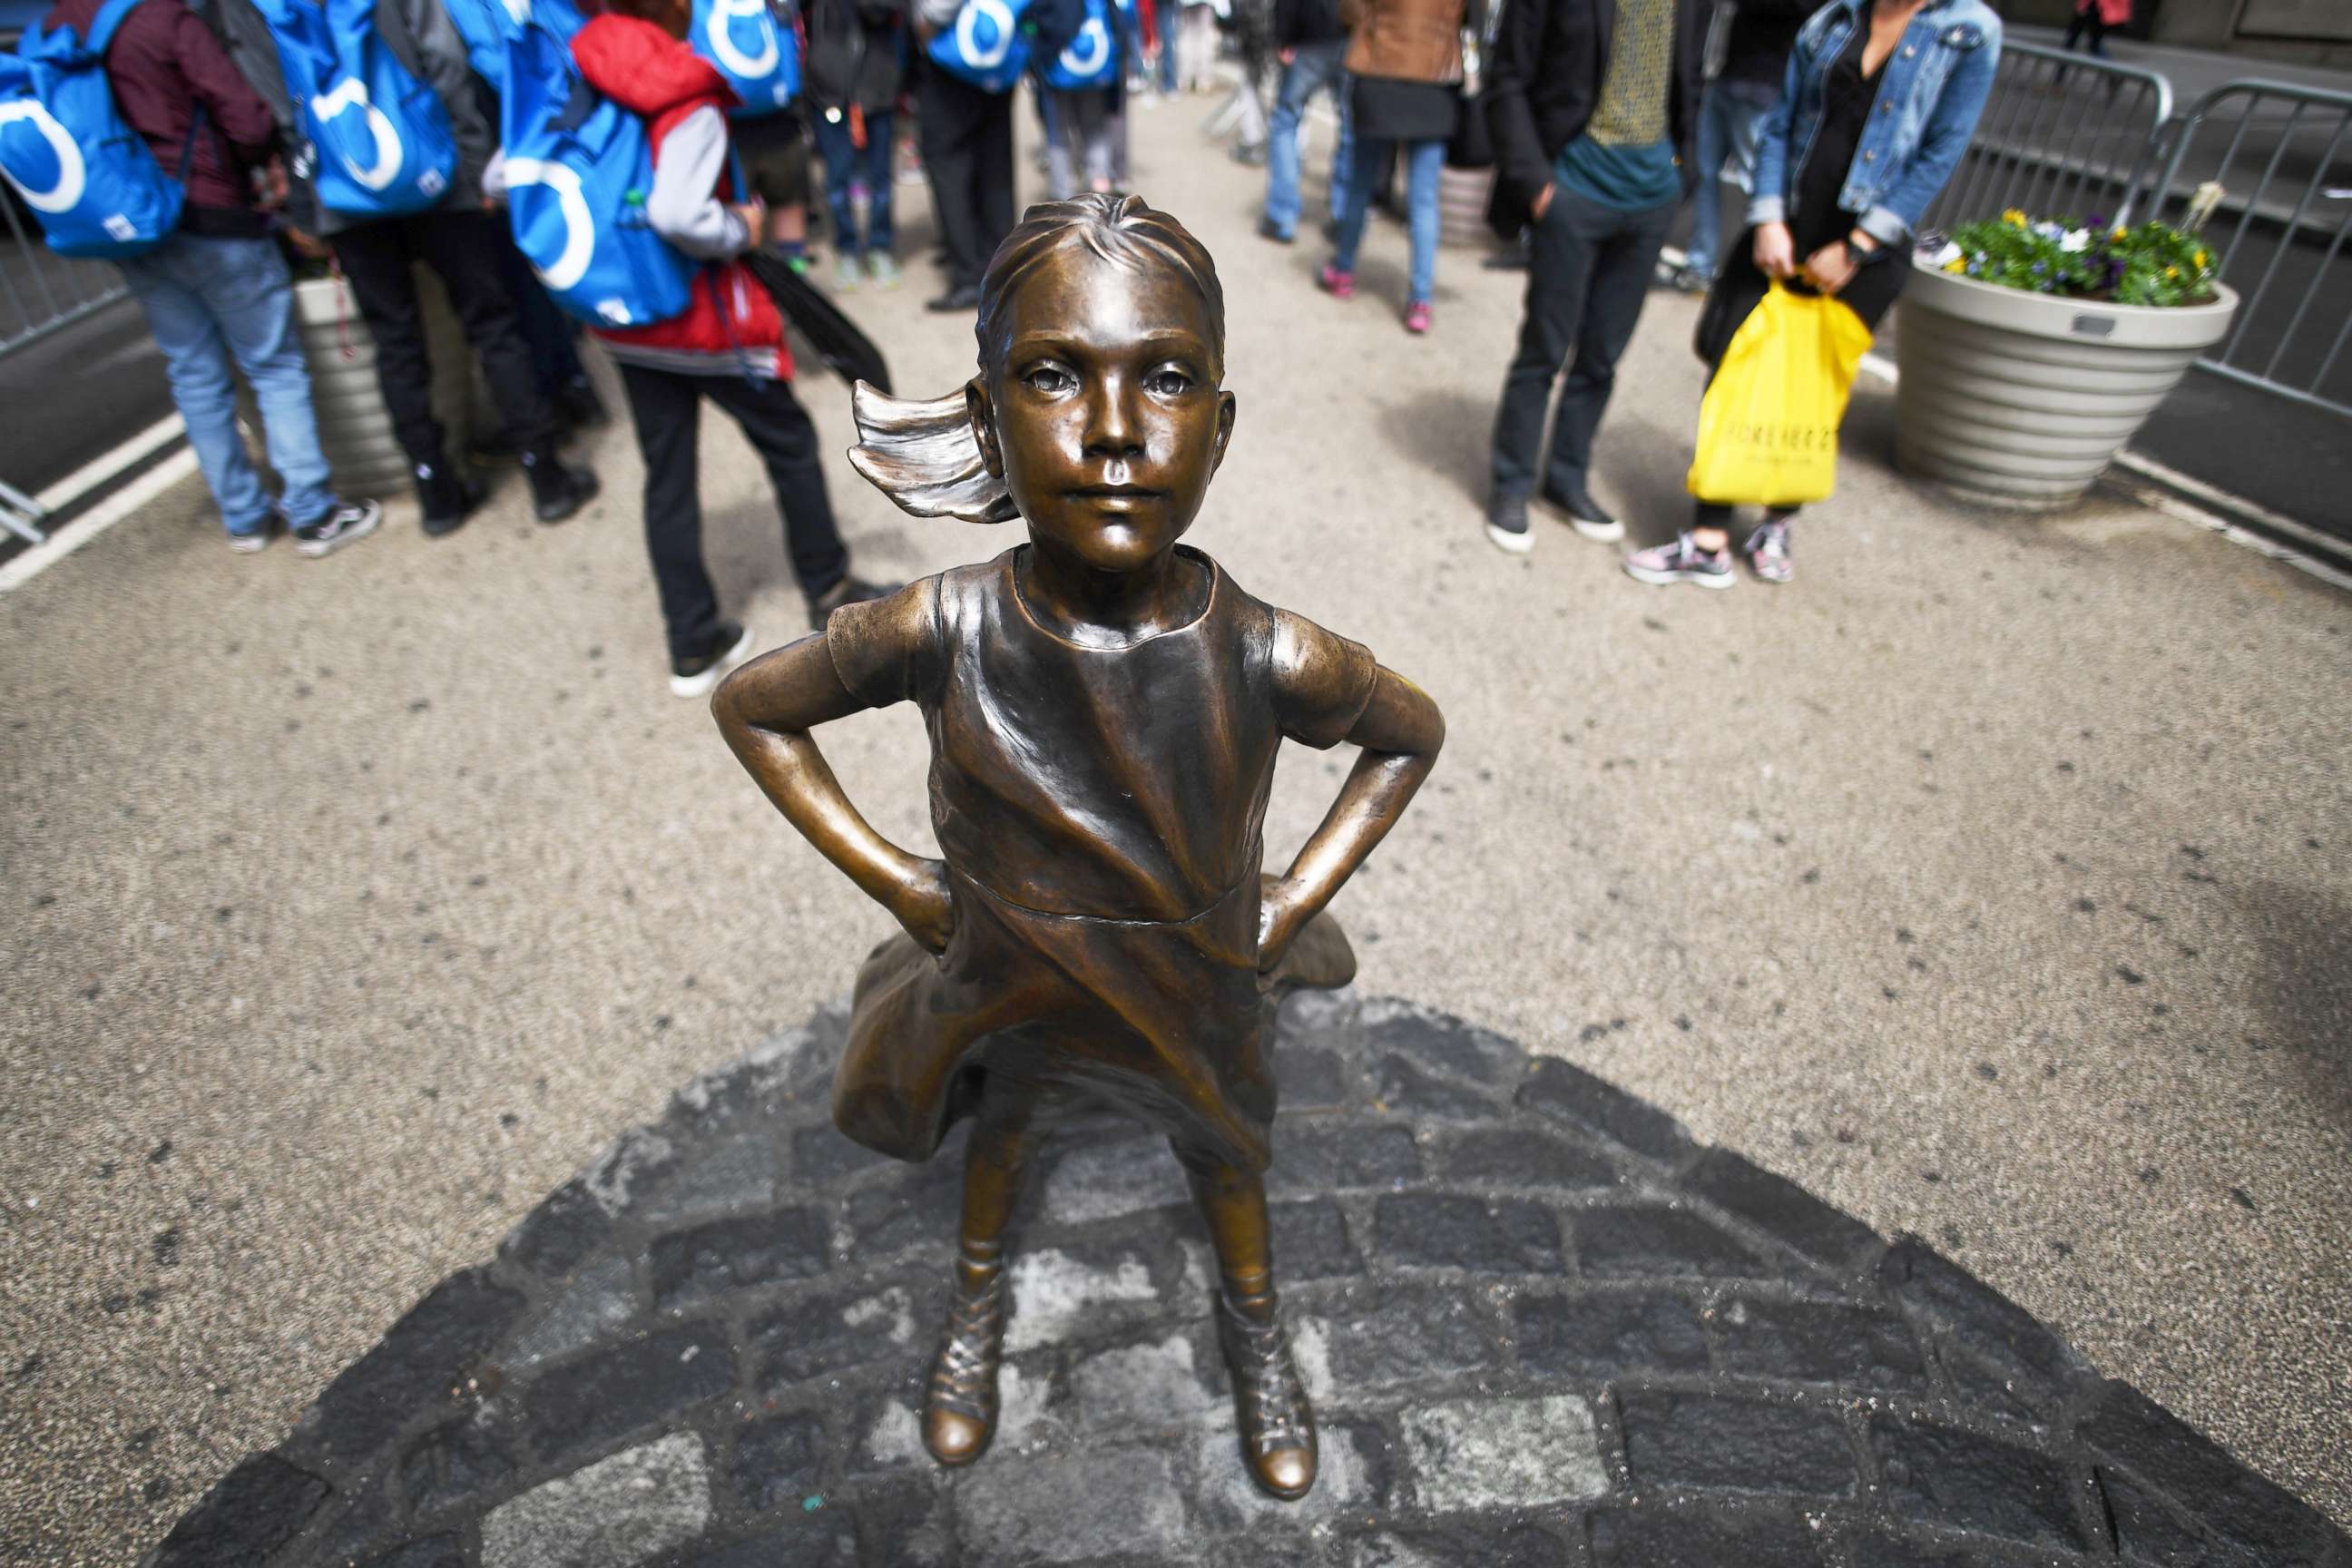 PHOTO: The "Fearless Girl" statue stands facing the "Charging Bull" as tourists take pictures in New York City, April 12, 2017.